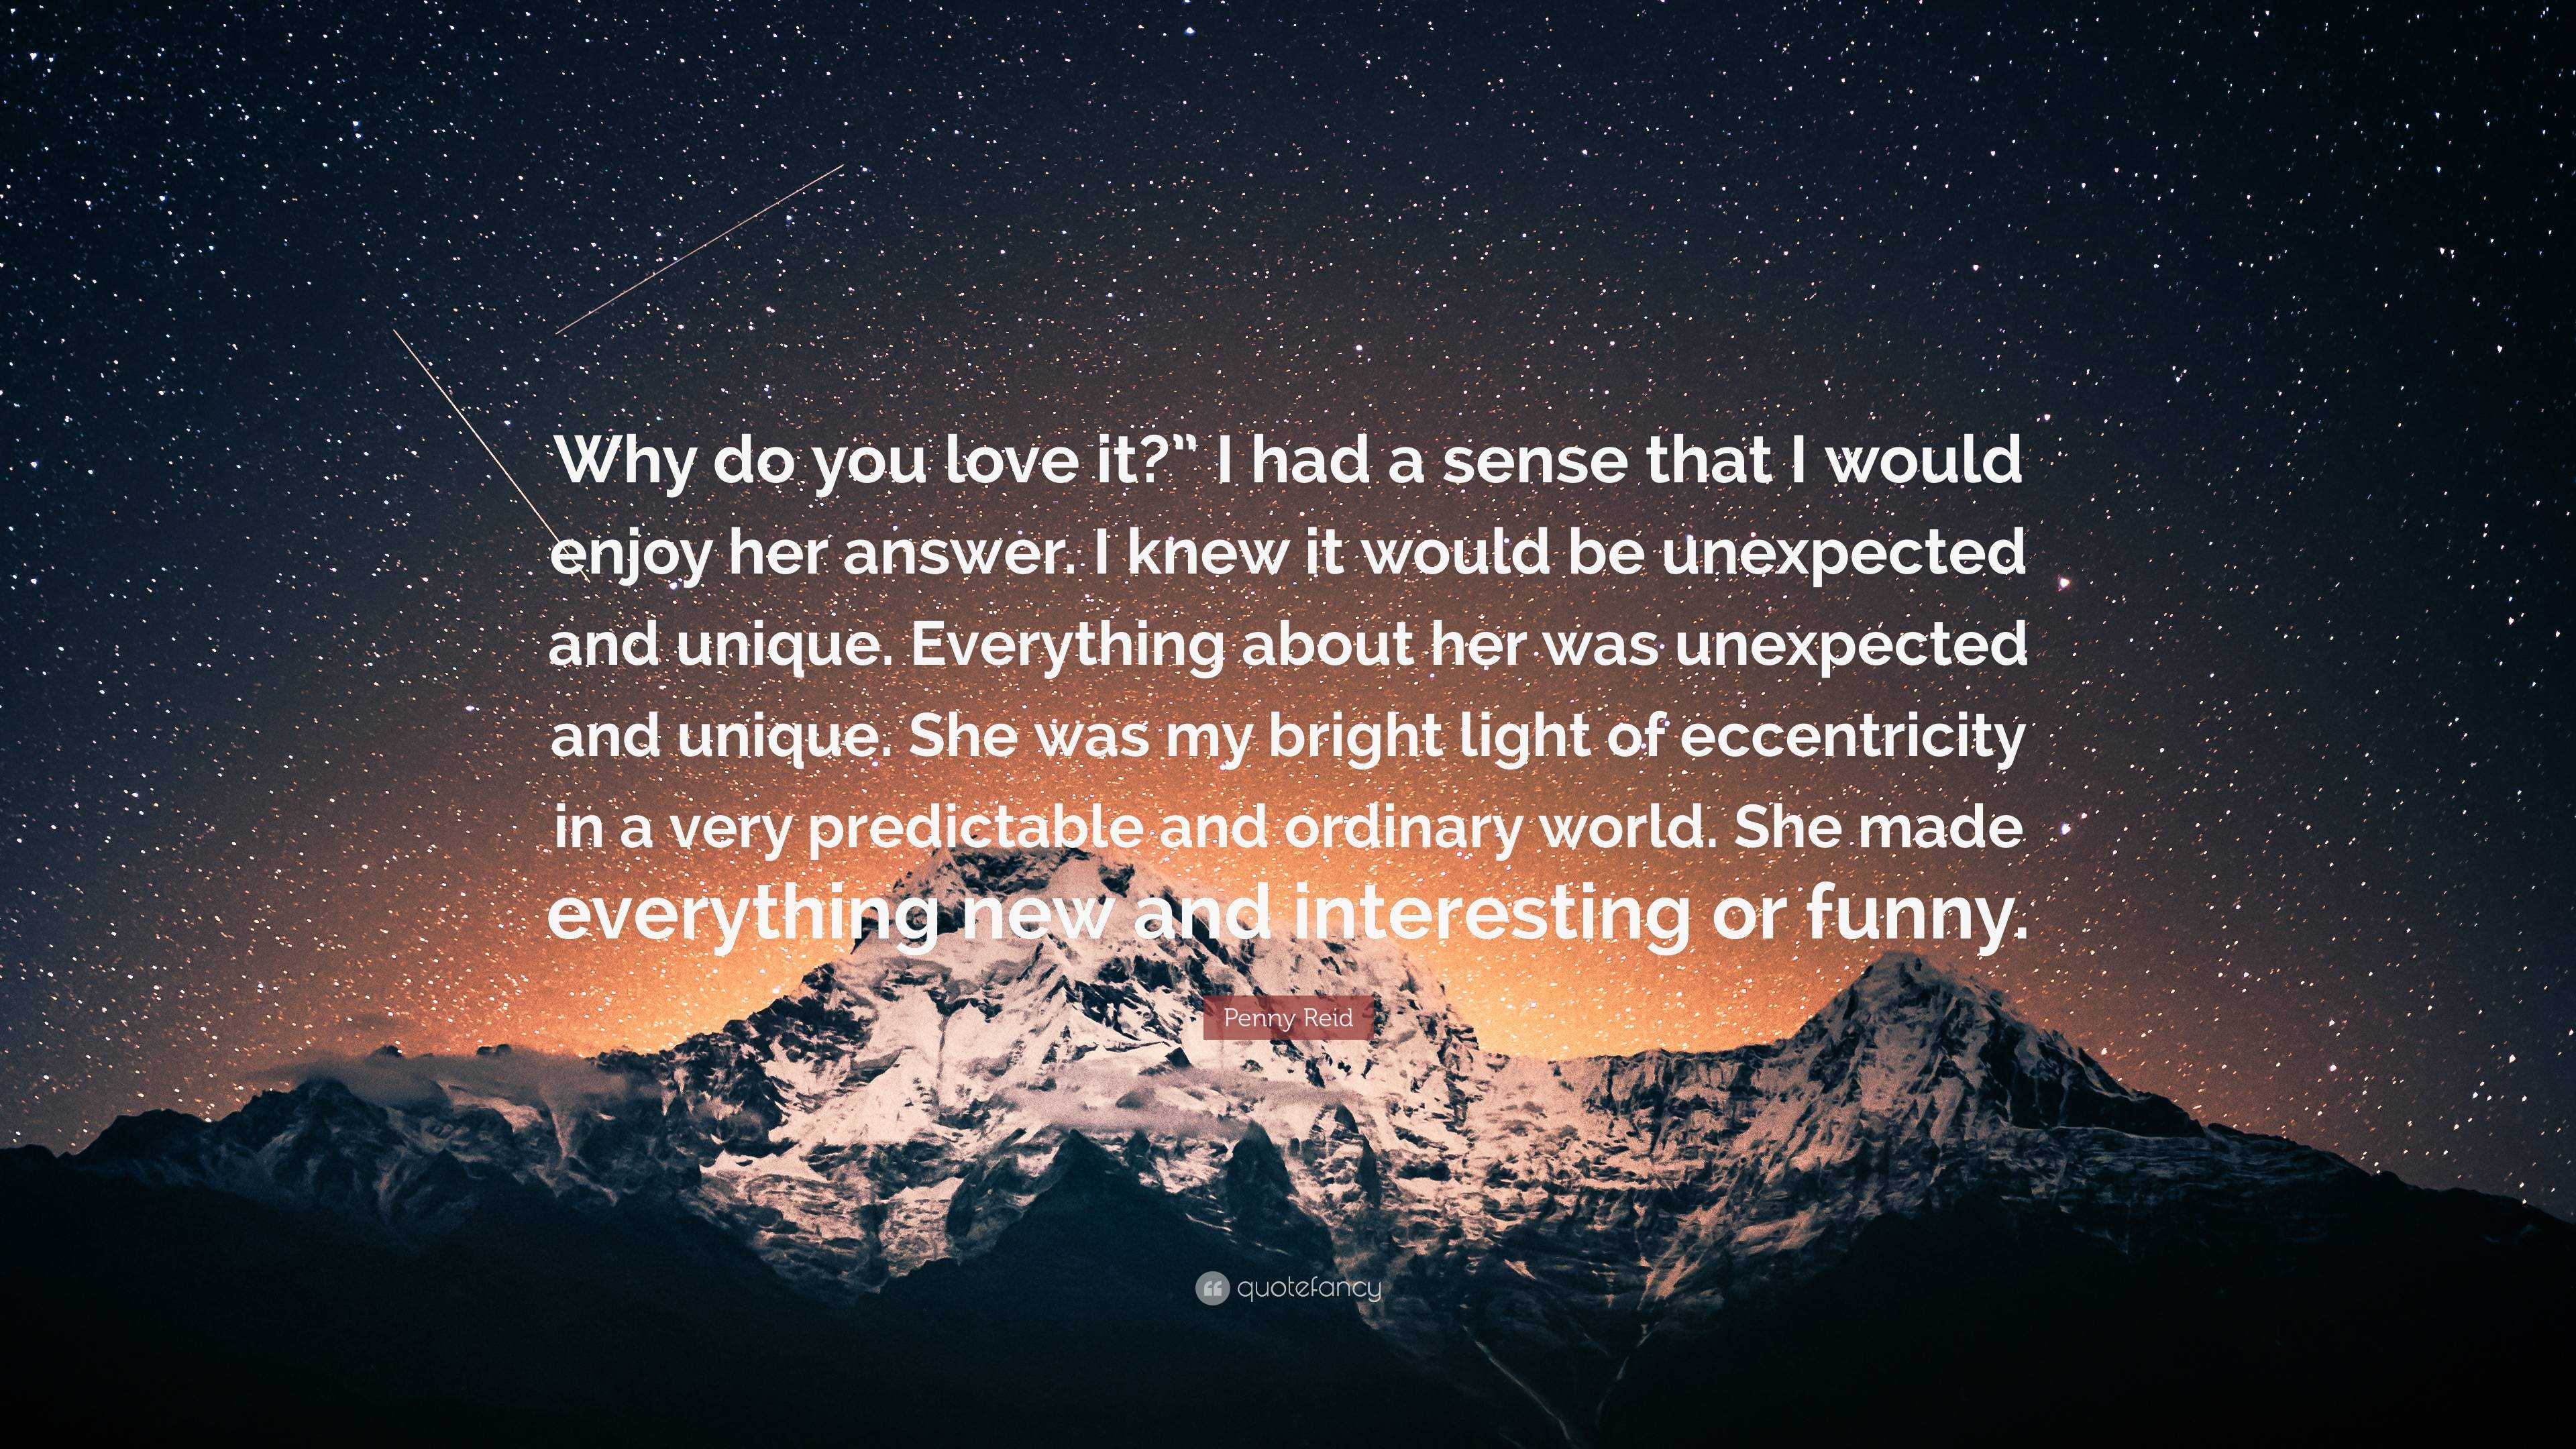 Penny Reid Quote: “Why do you love it?” I had a sense that I would enjoy  her answer. I knew it would be unexpected and unique. Everything a...”